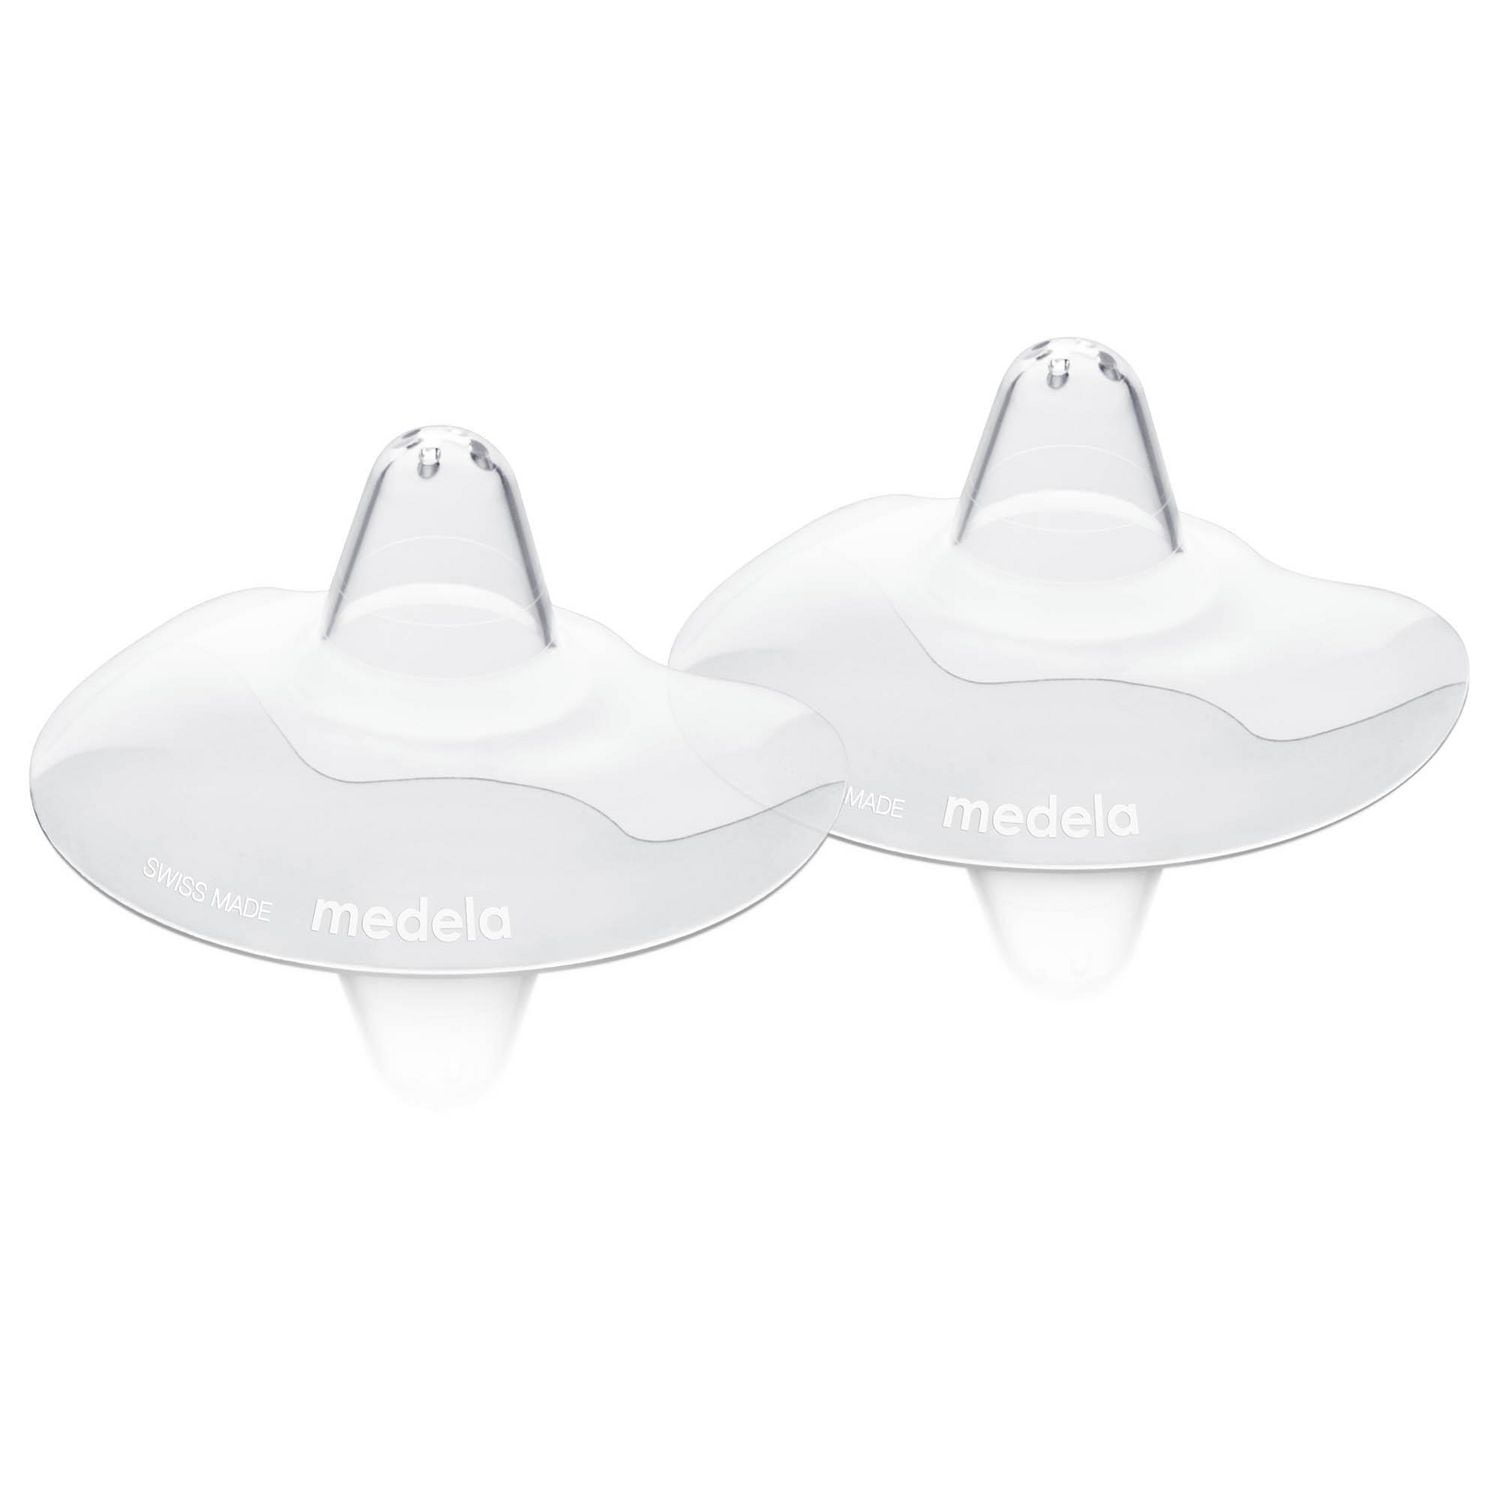 Medela Contact Nipple Shields & Case - 24MM, Contact Nipple Shields with  Case - 2PK 